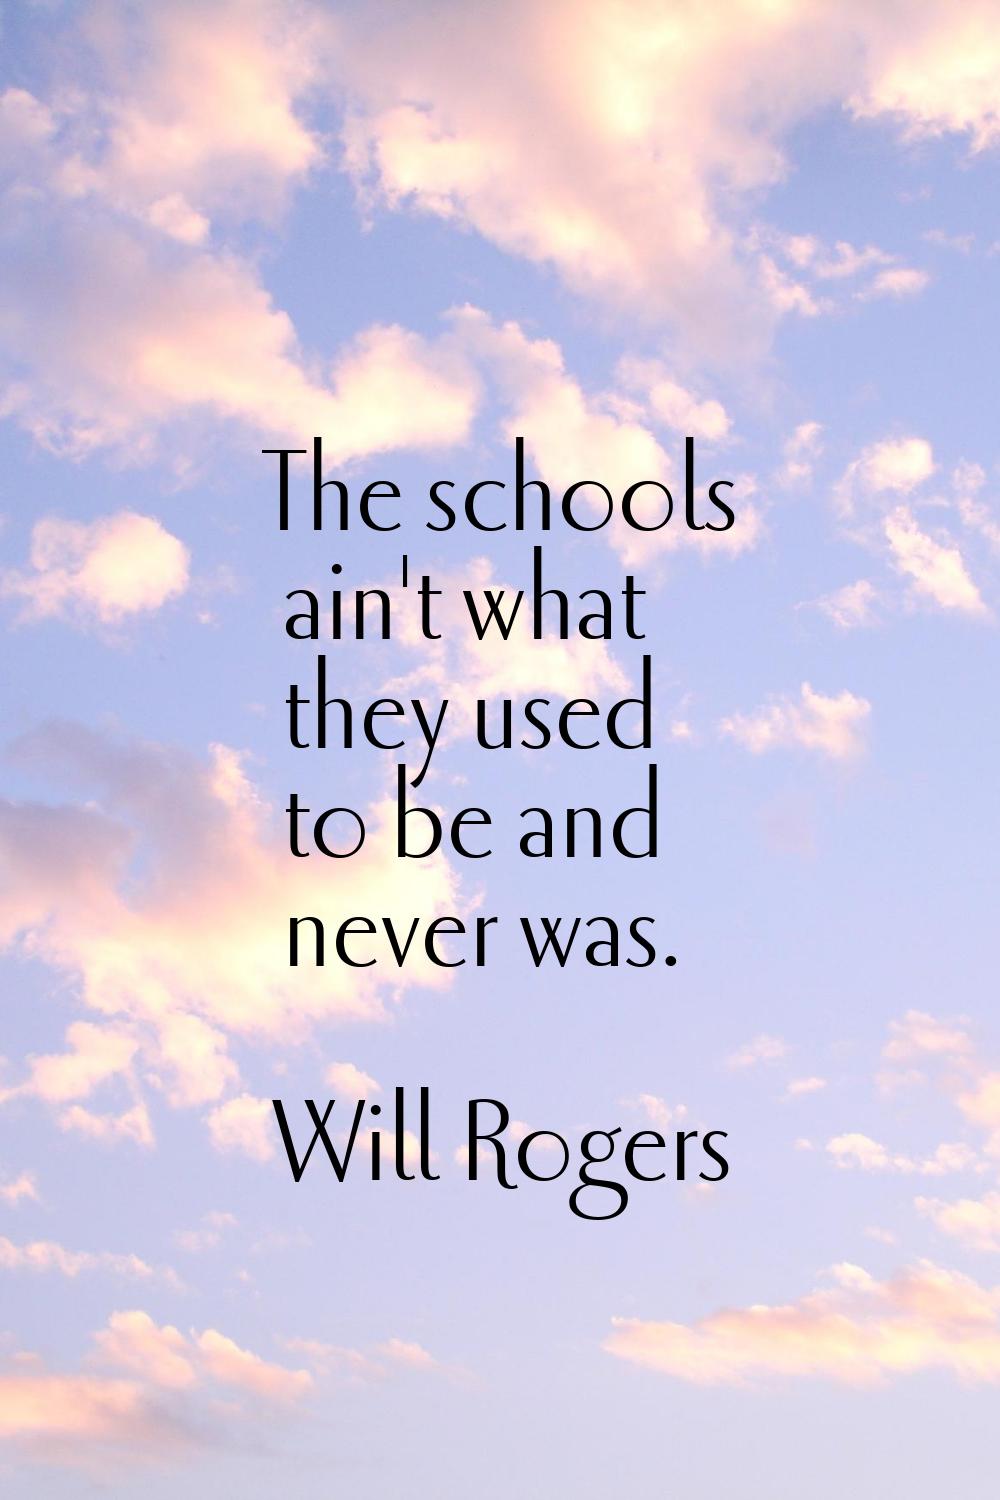 The schools ain't what they used to be and never was.